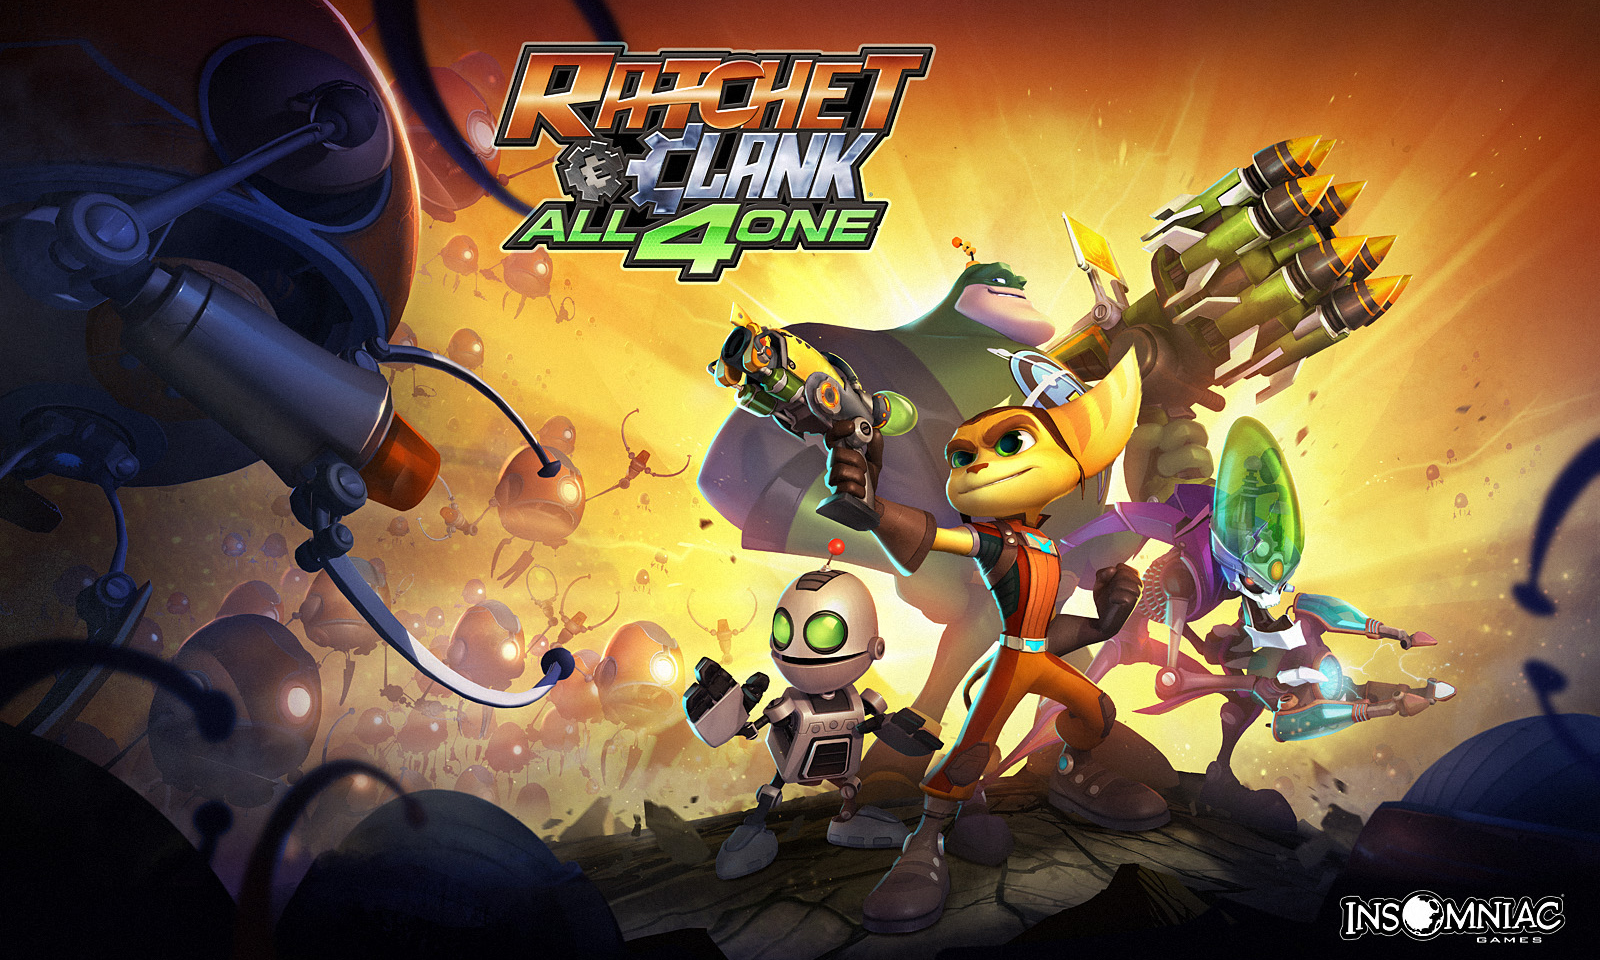 Ratchet & Clank Hd Wallpaper Hd - Ratchet And Clank All 4 One Digital , HD Wallpaper & Backgrounds